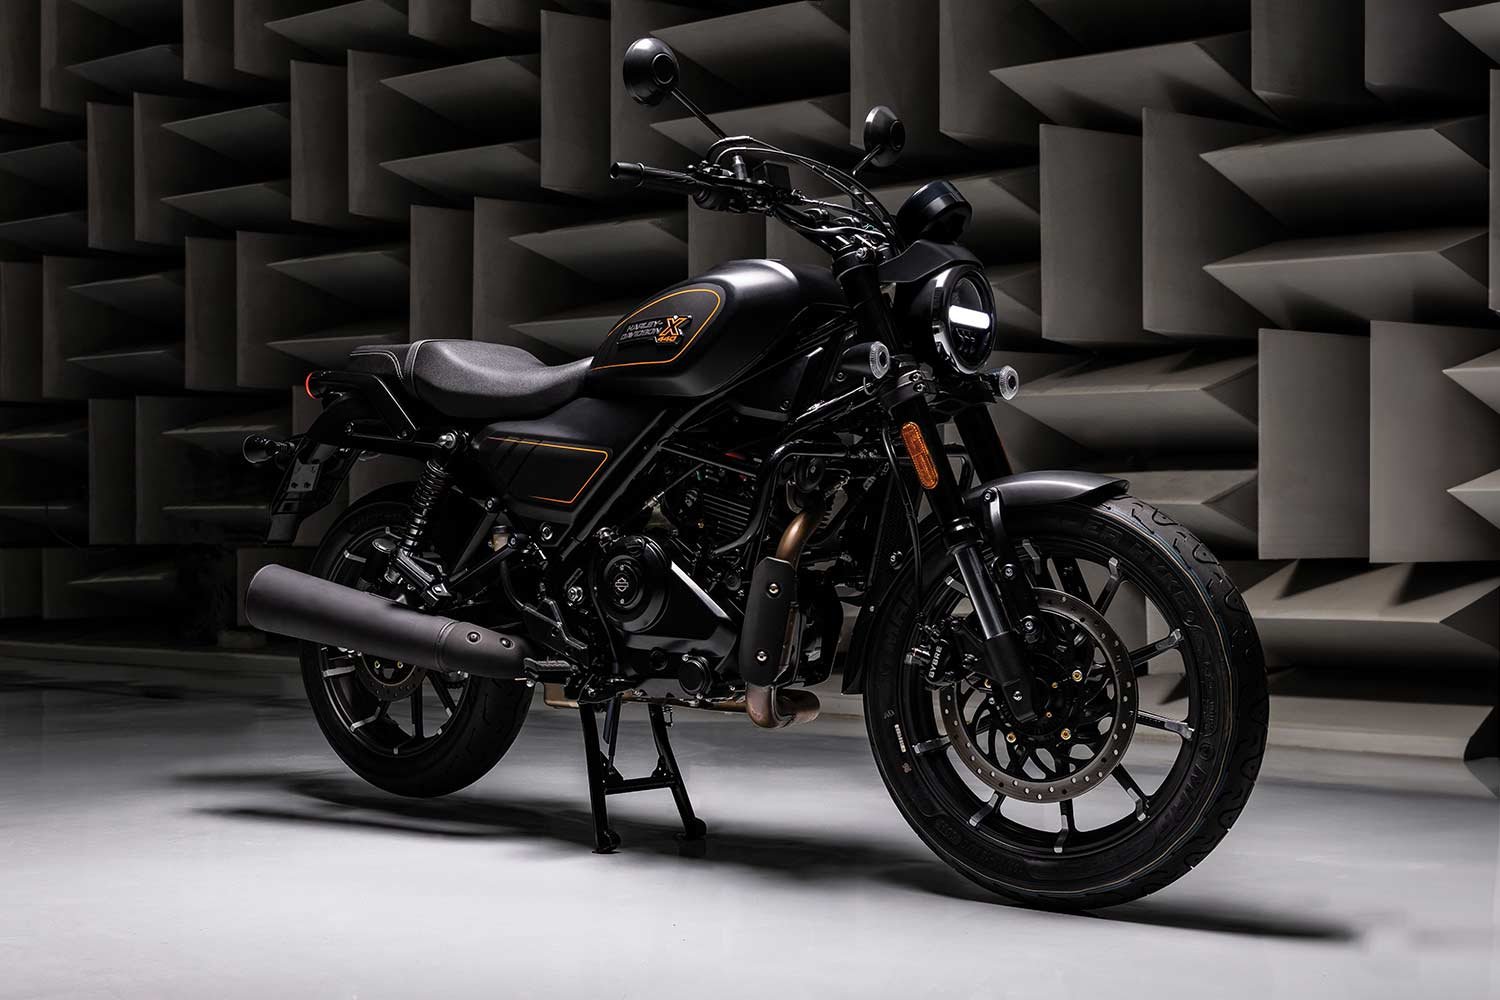 made-in-india-harley-davidson-x-440-roadster-unveiled-autobics